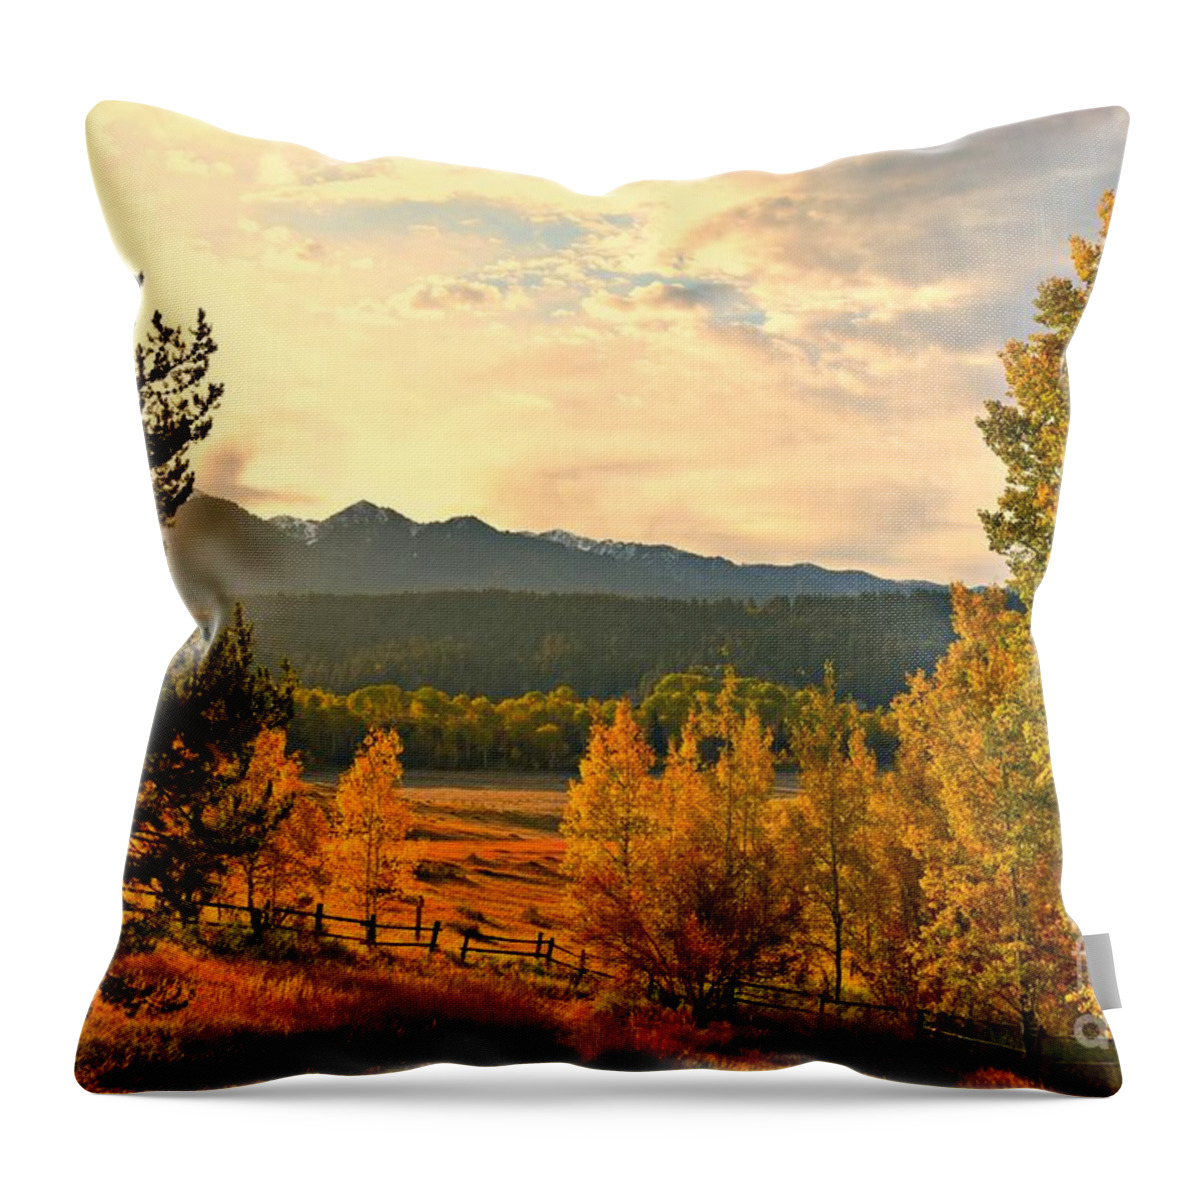 Fall Colors Throw Pillow featuring the photograph Morning Light by Dorrene BrownButterfield